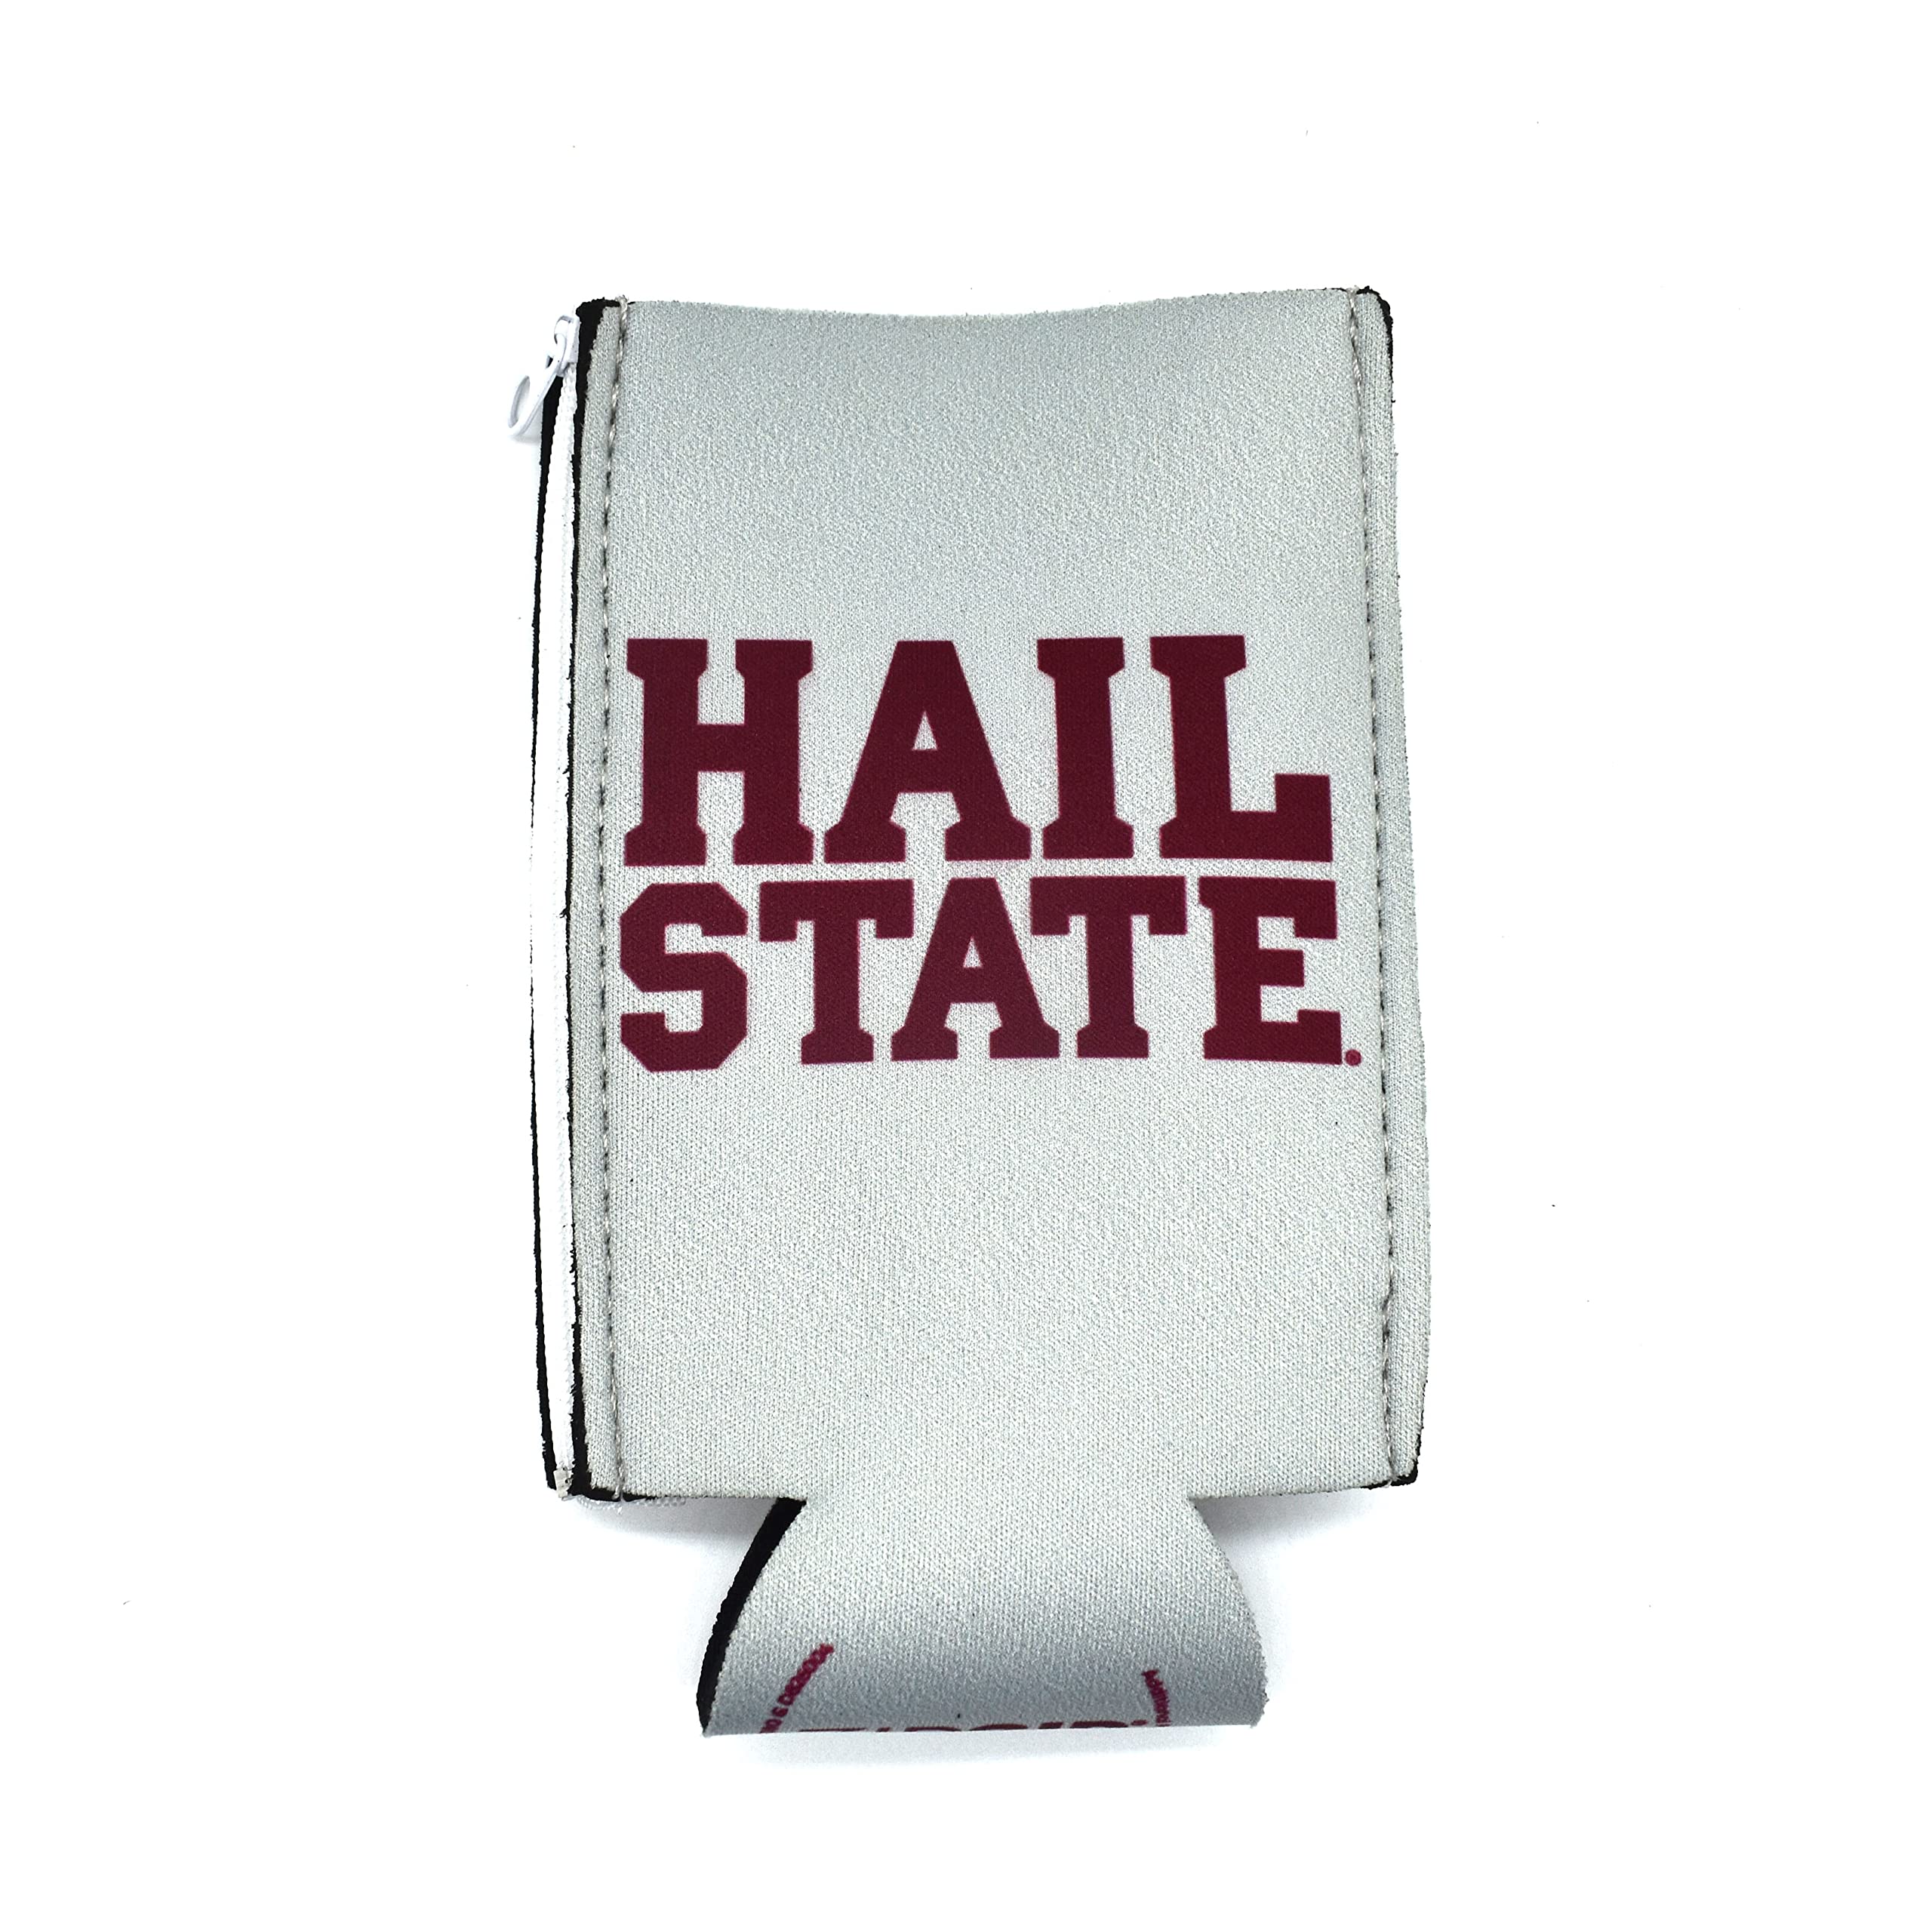 ZipSip NONMAGNET- MSU Adjustable All-In-One Coozie with Zippers for Cans, Bottles, Slim Cans, Pint Glasses, Party Cups – Can Cooler - Insolated Neoprene Sleeve - MSU Bulldogs Light Gray, Large